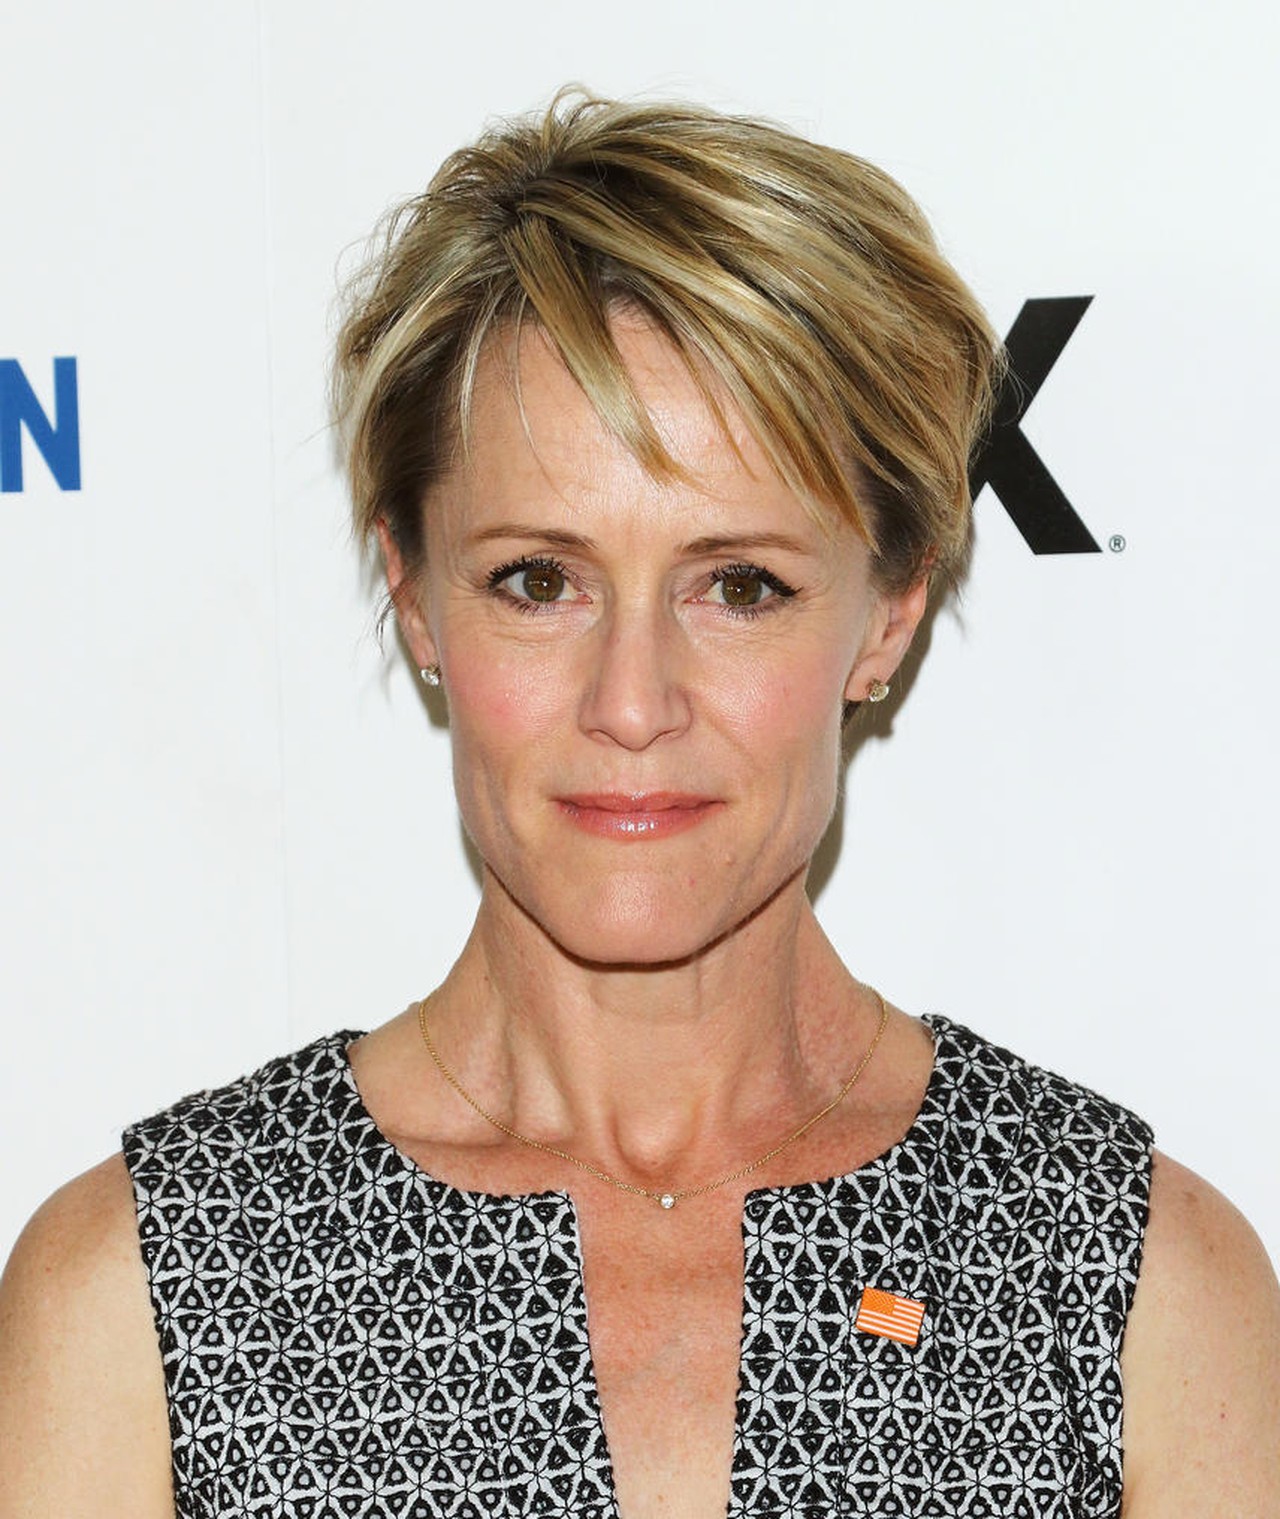 Mary Stuart Masterson's films include Fried Green Tomatoes, Benny &...